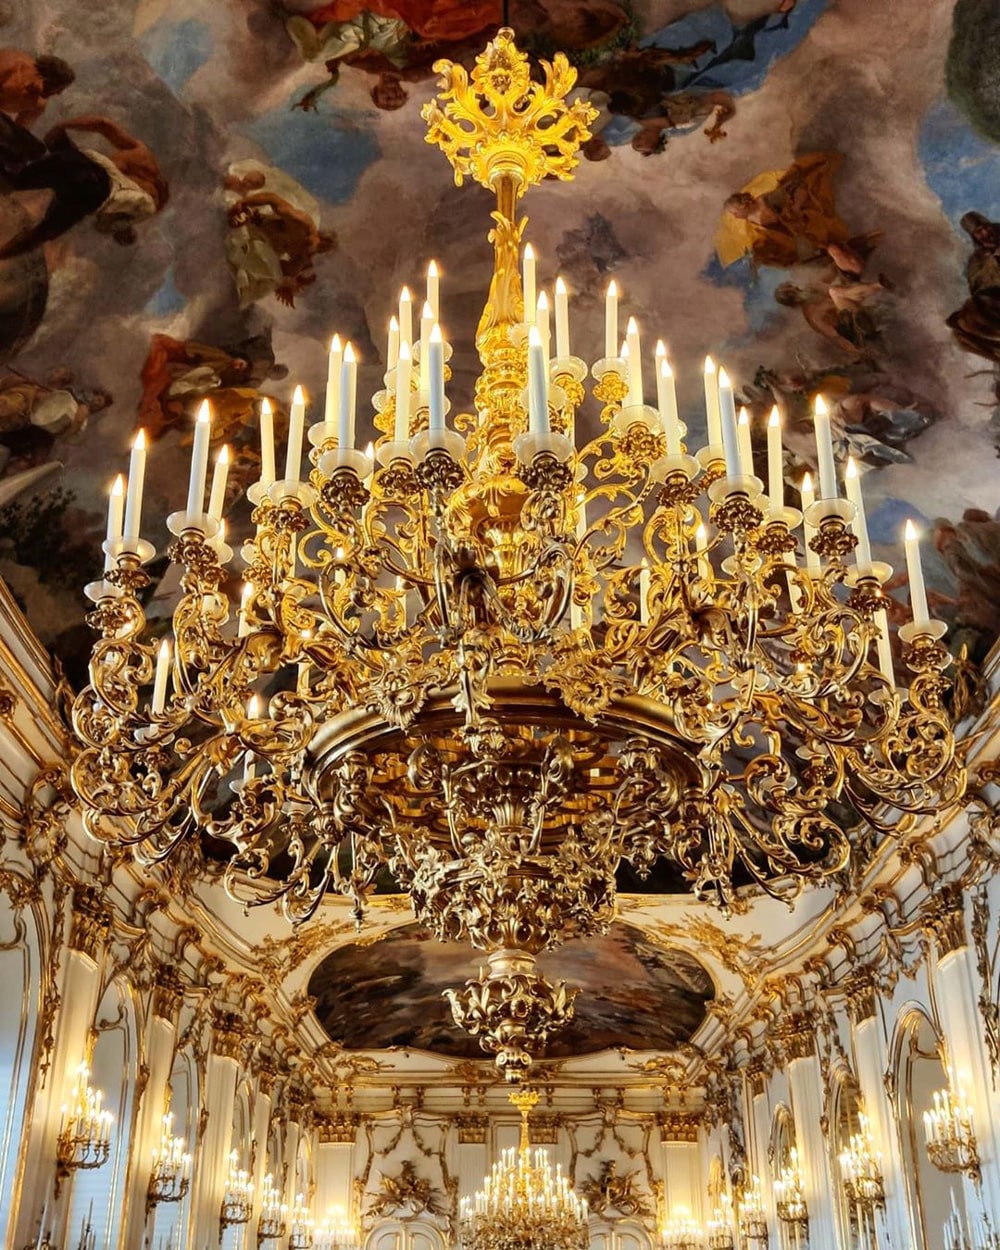 Schonbrunn Palace is home to opulent 18th-century interiors from the time of Maria Theresia